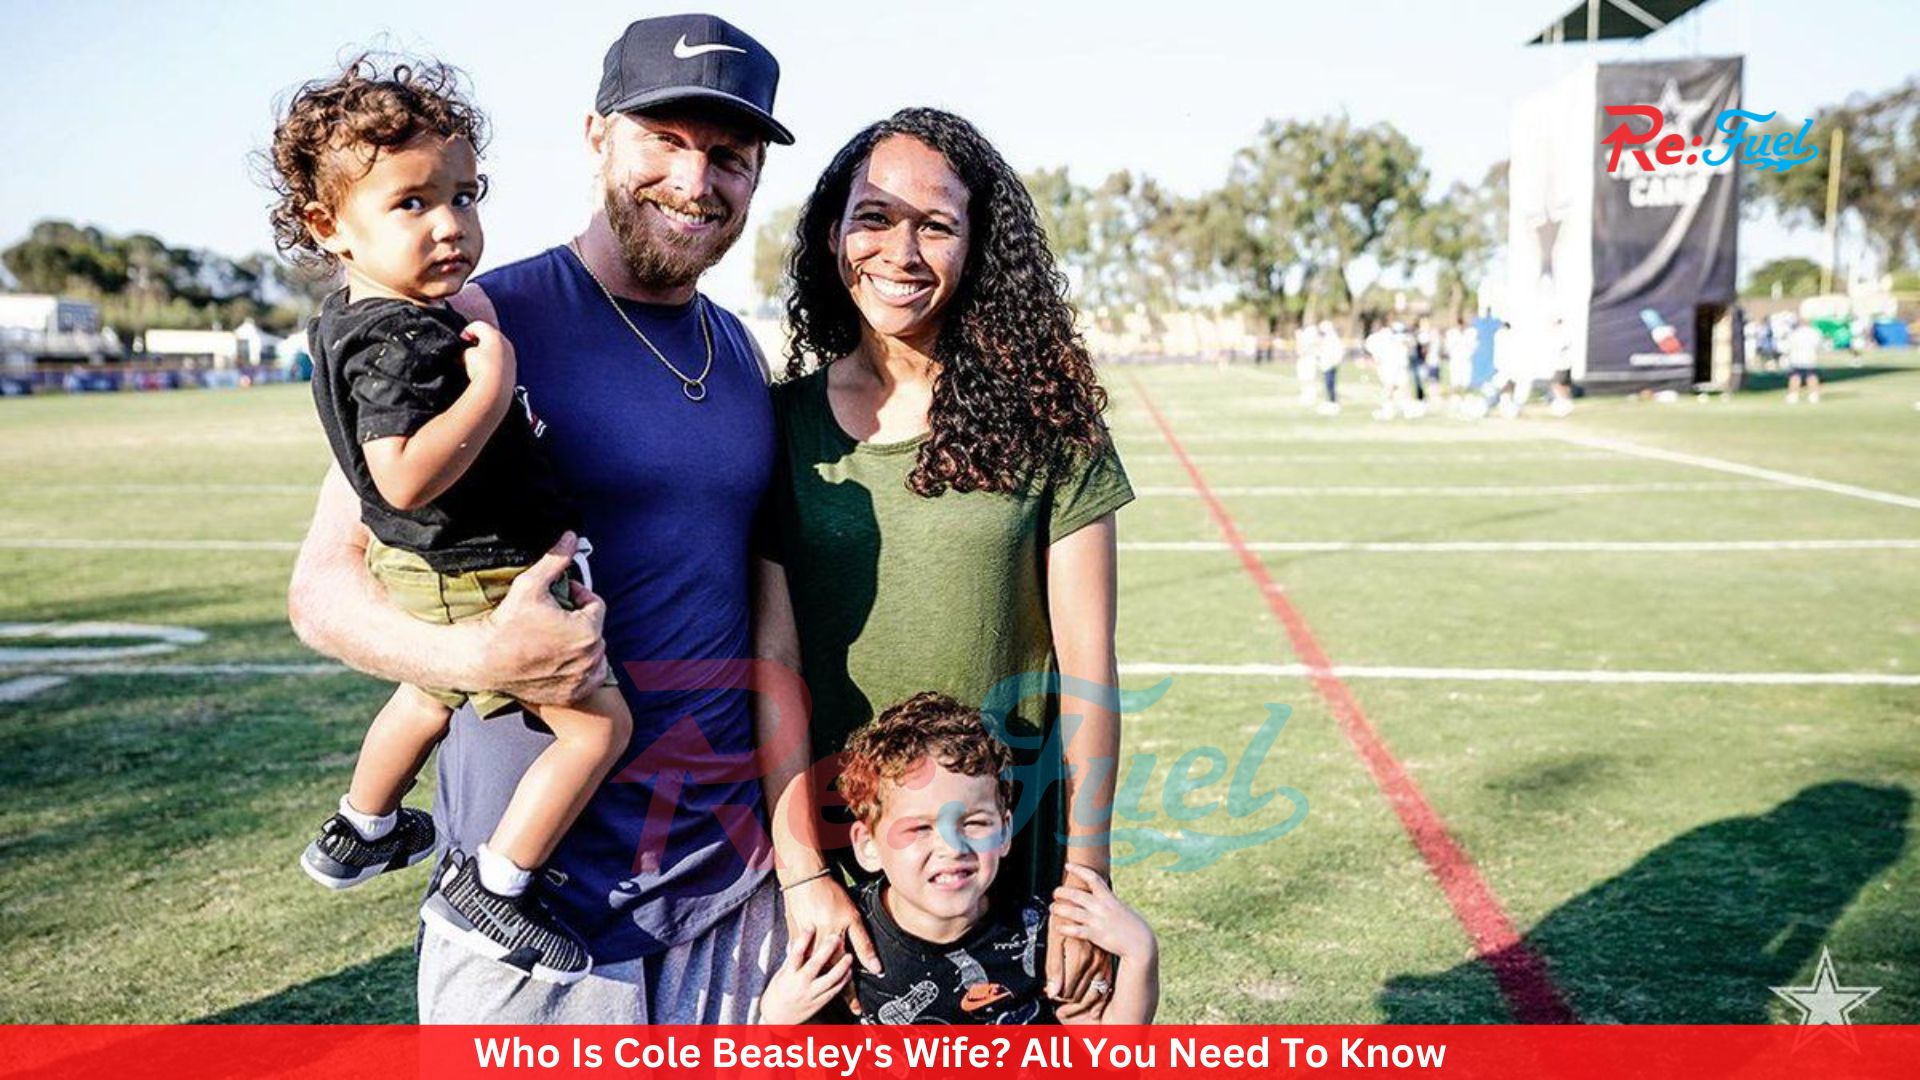 Who Is Cole Beasley's Wife? All You Need To Know